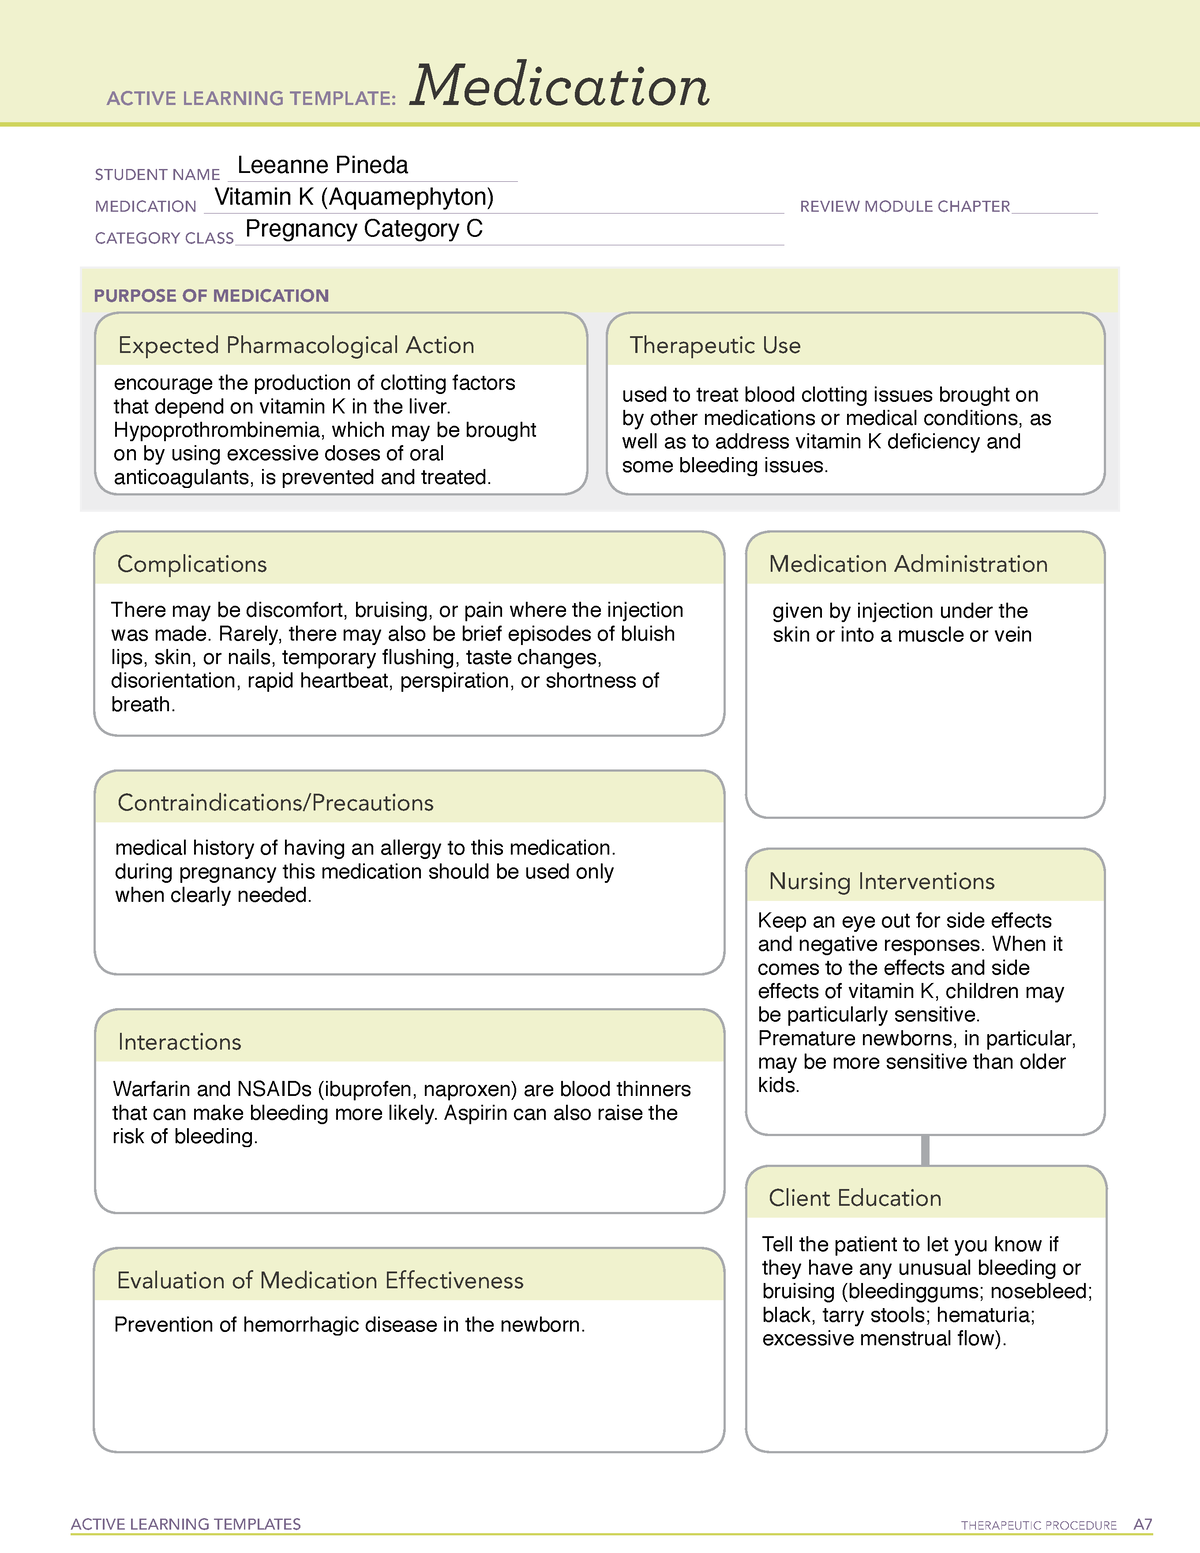 vitamin-k-ati-learning-template-active-learning-templates